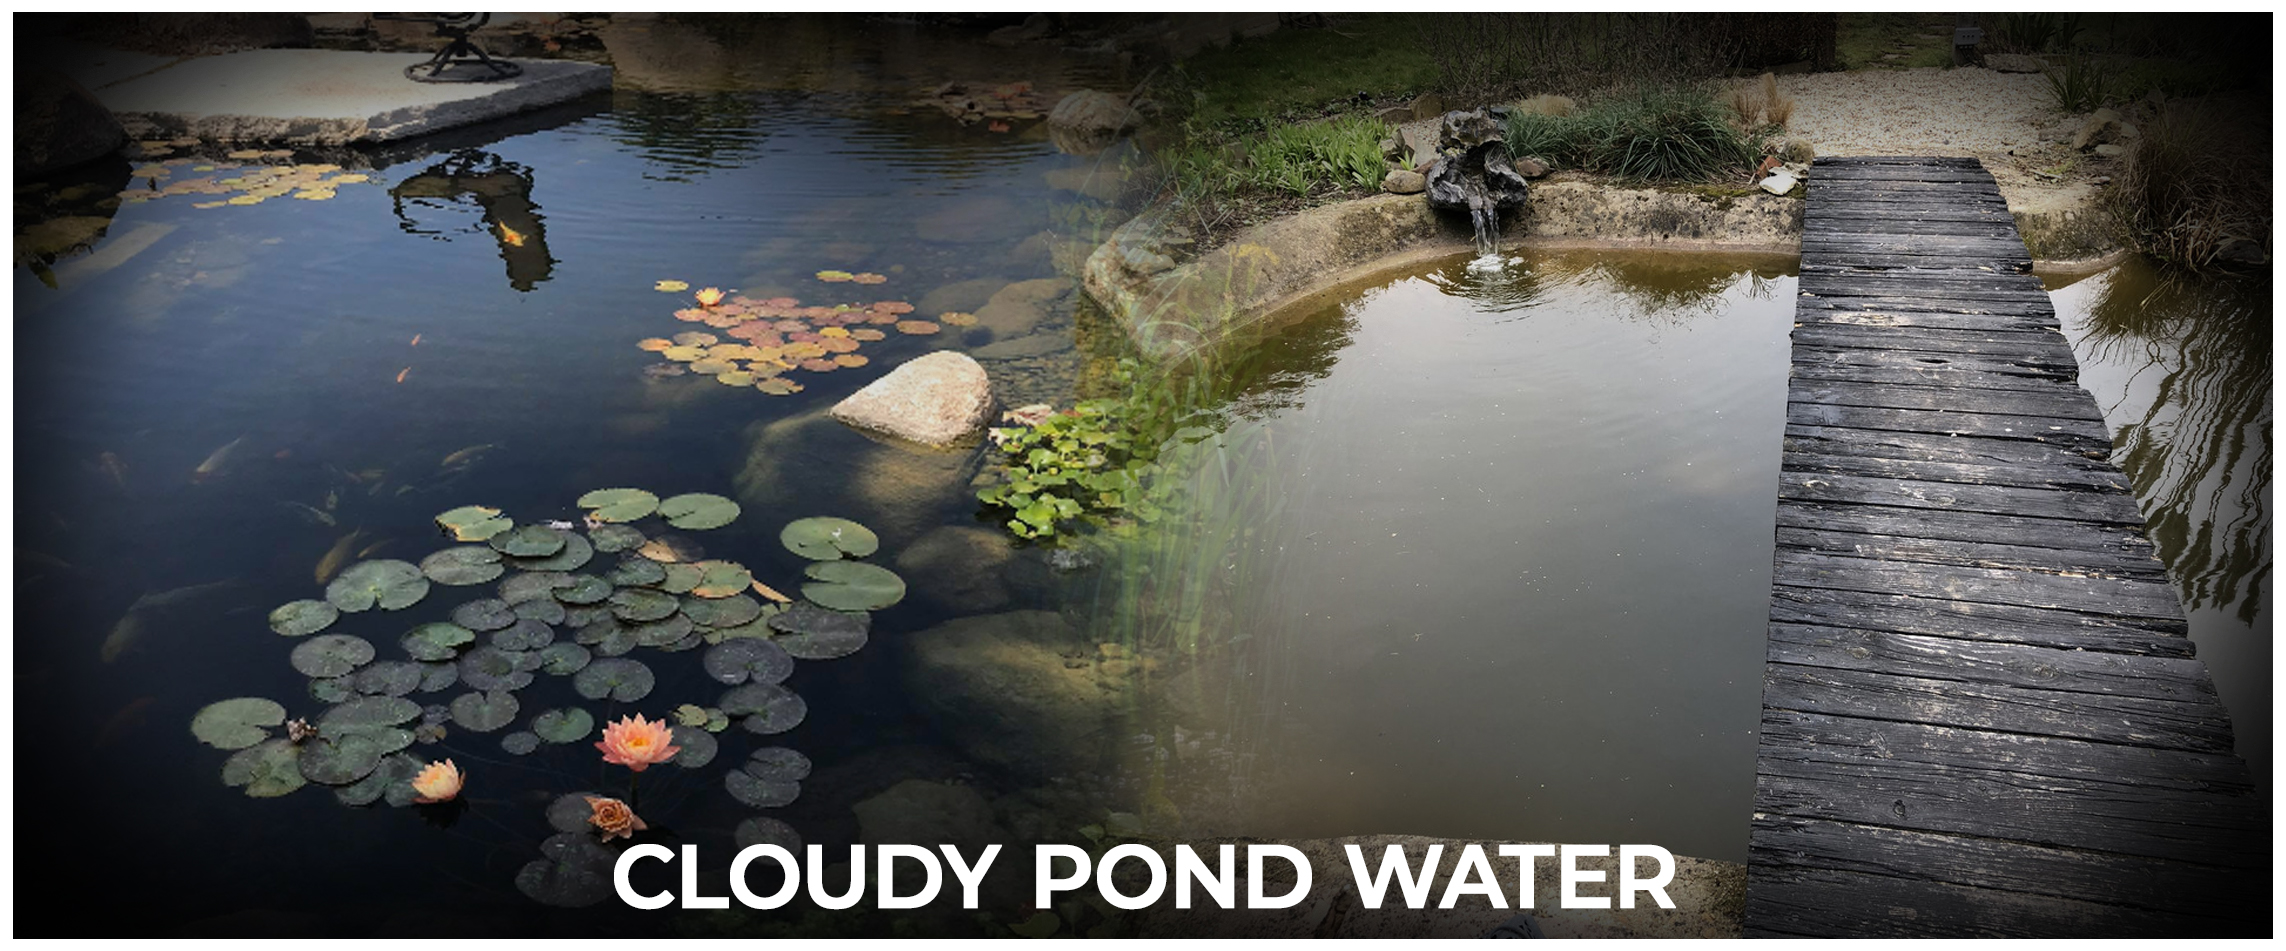  Cloudy Pond Water